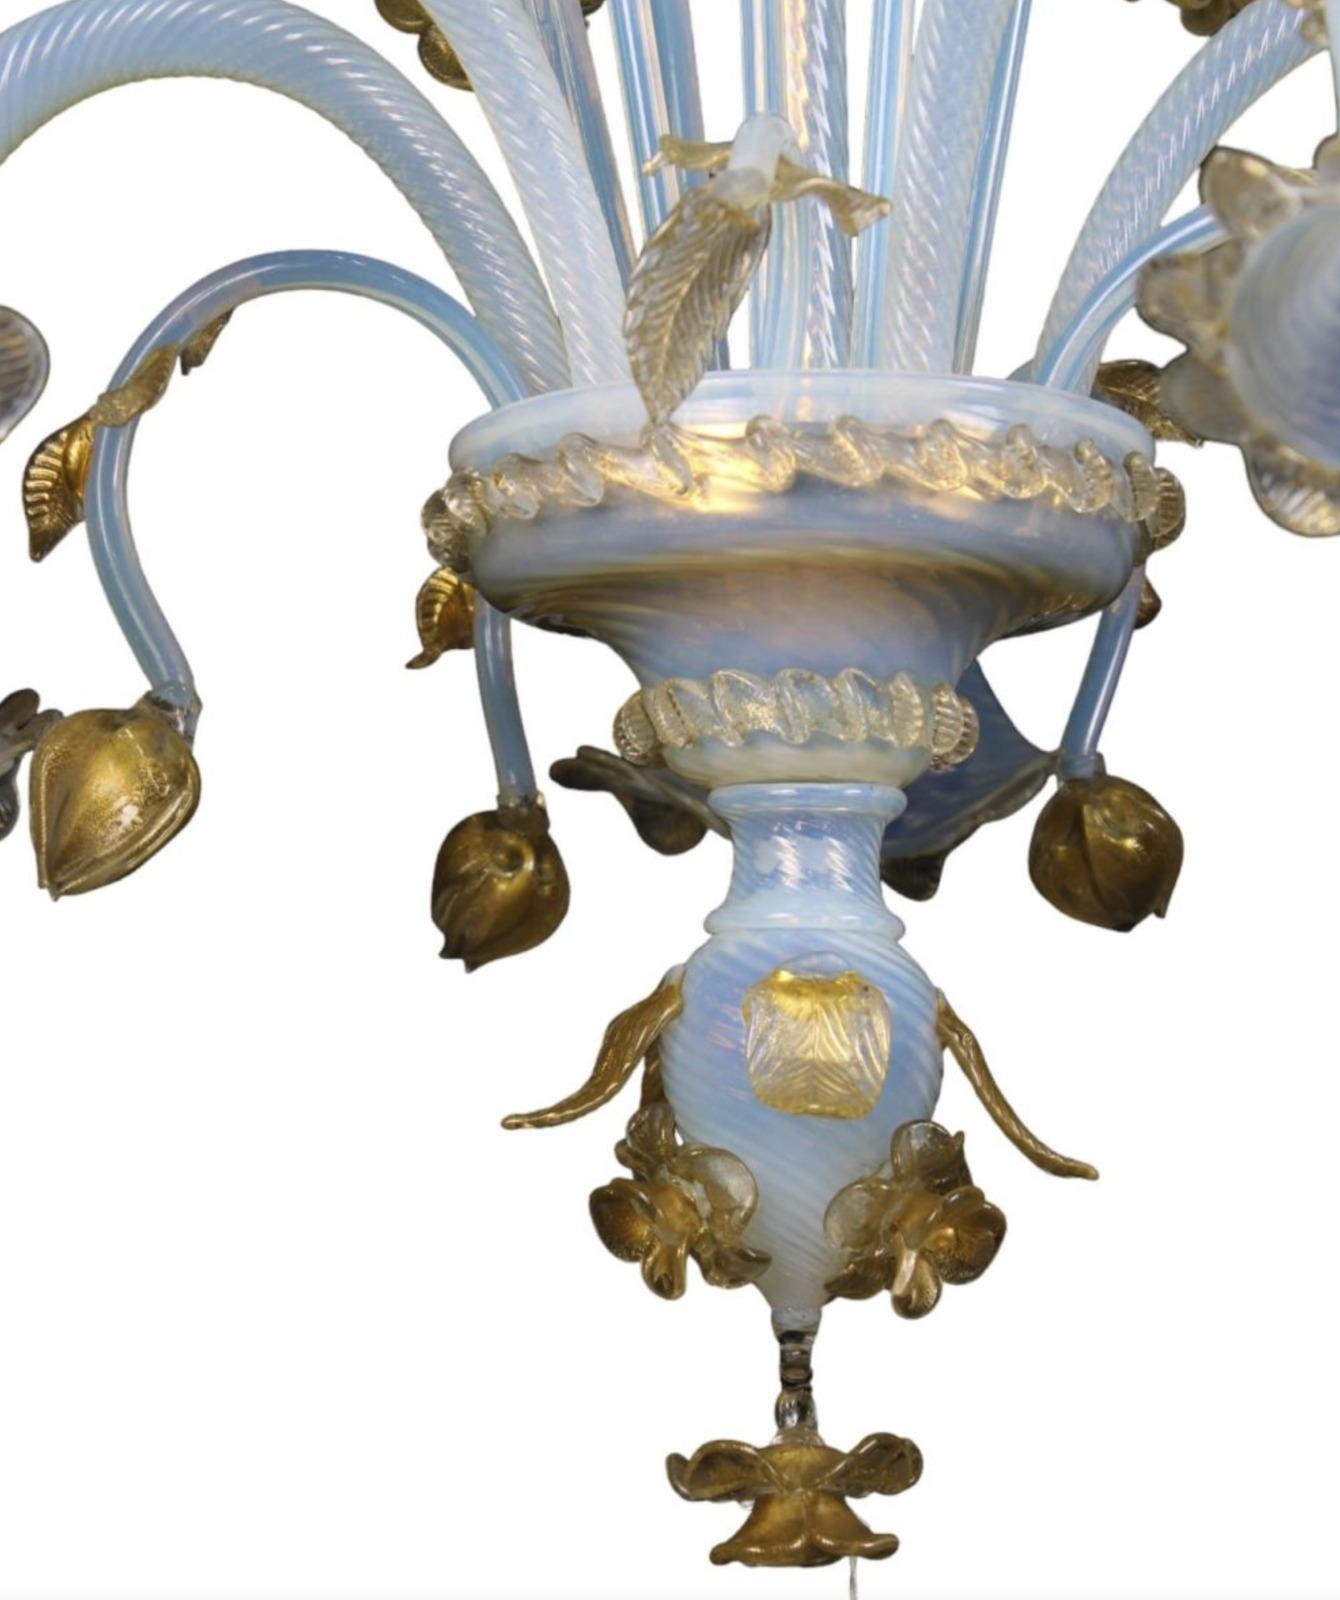 5 ARMS CHANDELIER
in Murano glass Venice Early 20th Century
with gold highlights, small breaks and missing parts
h 96 x 85 cm
good conditions